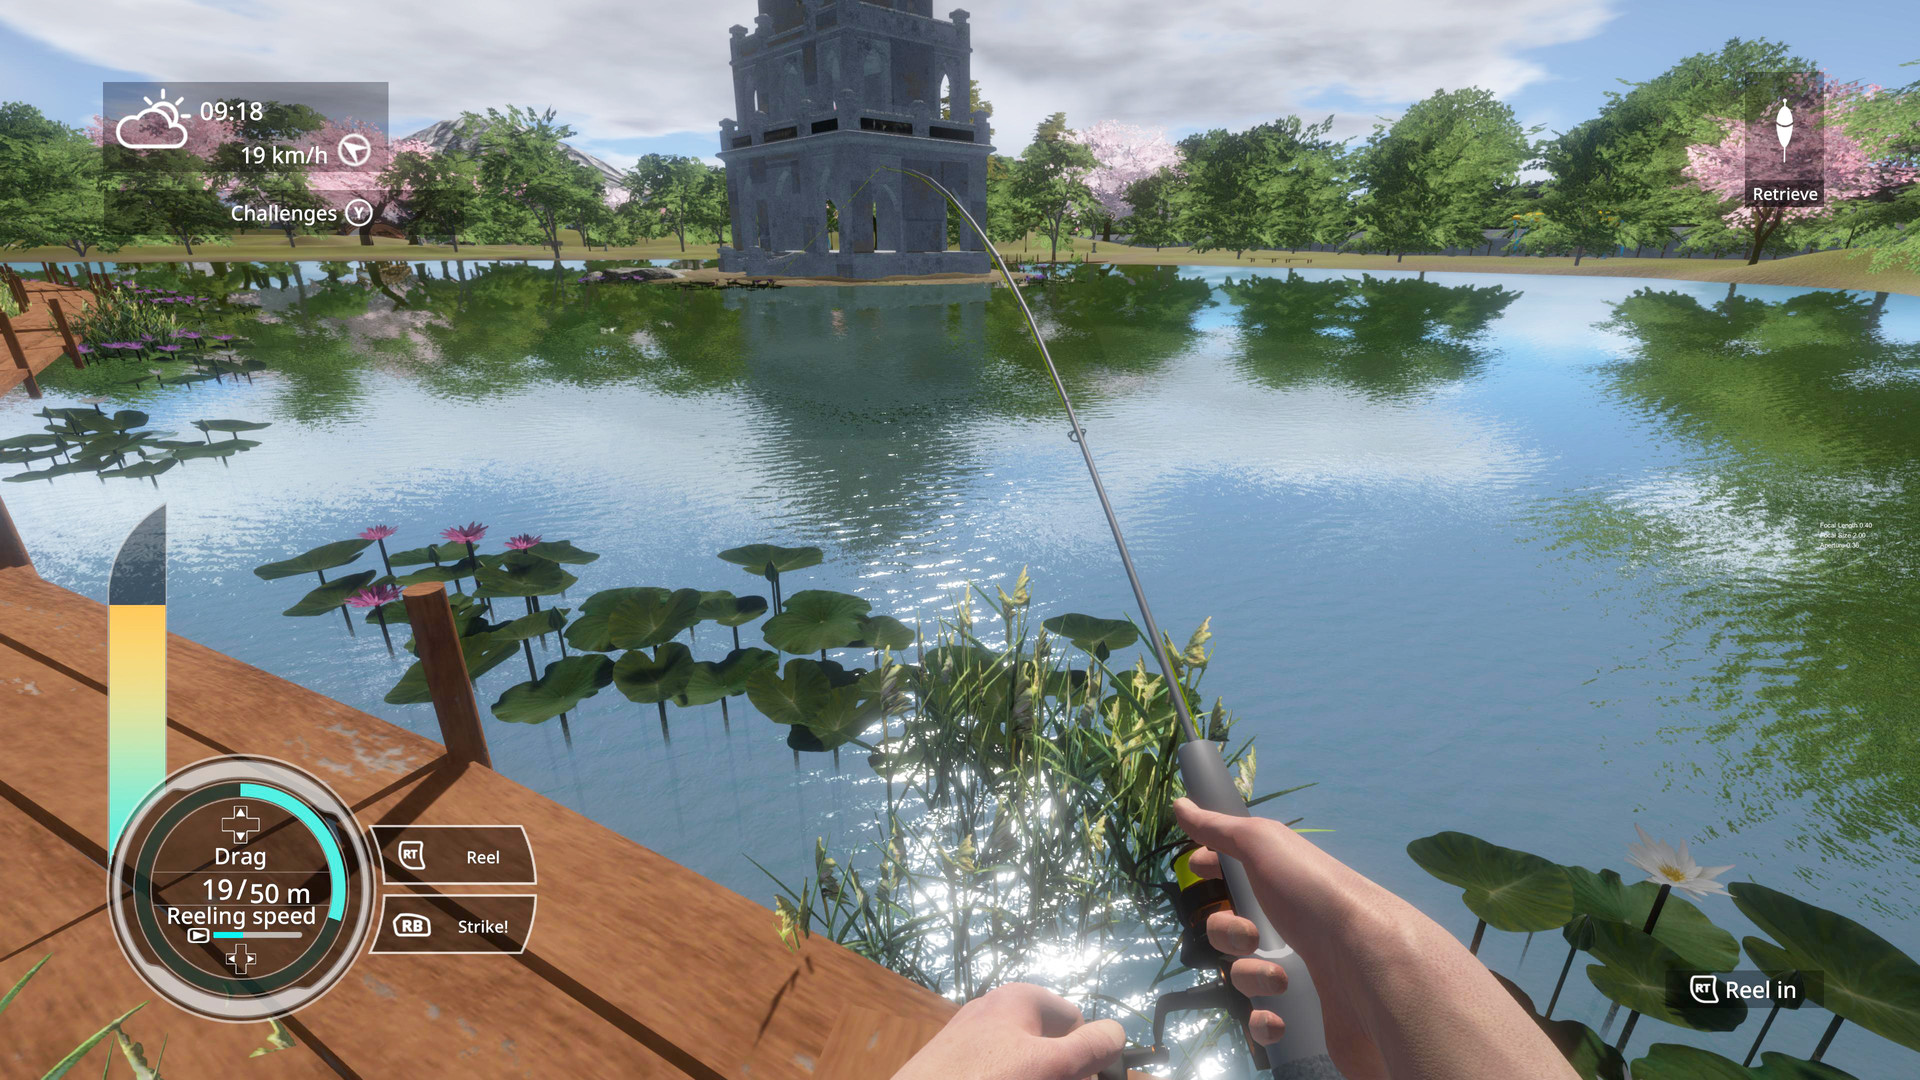 where id fly fishing simulator hd stored on a pc